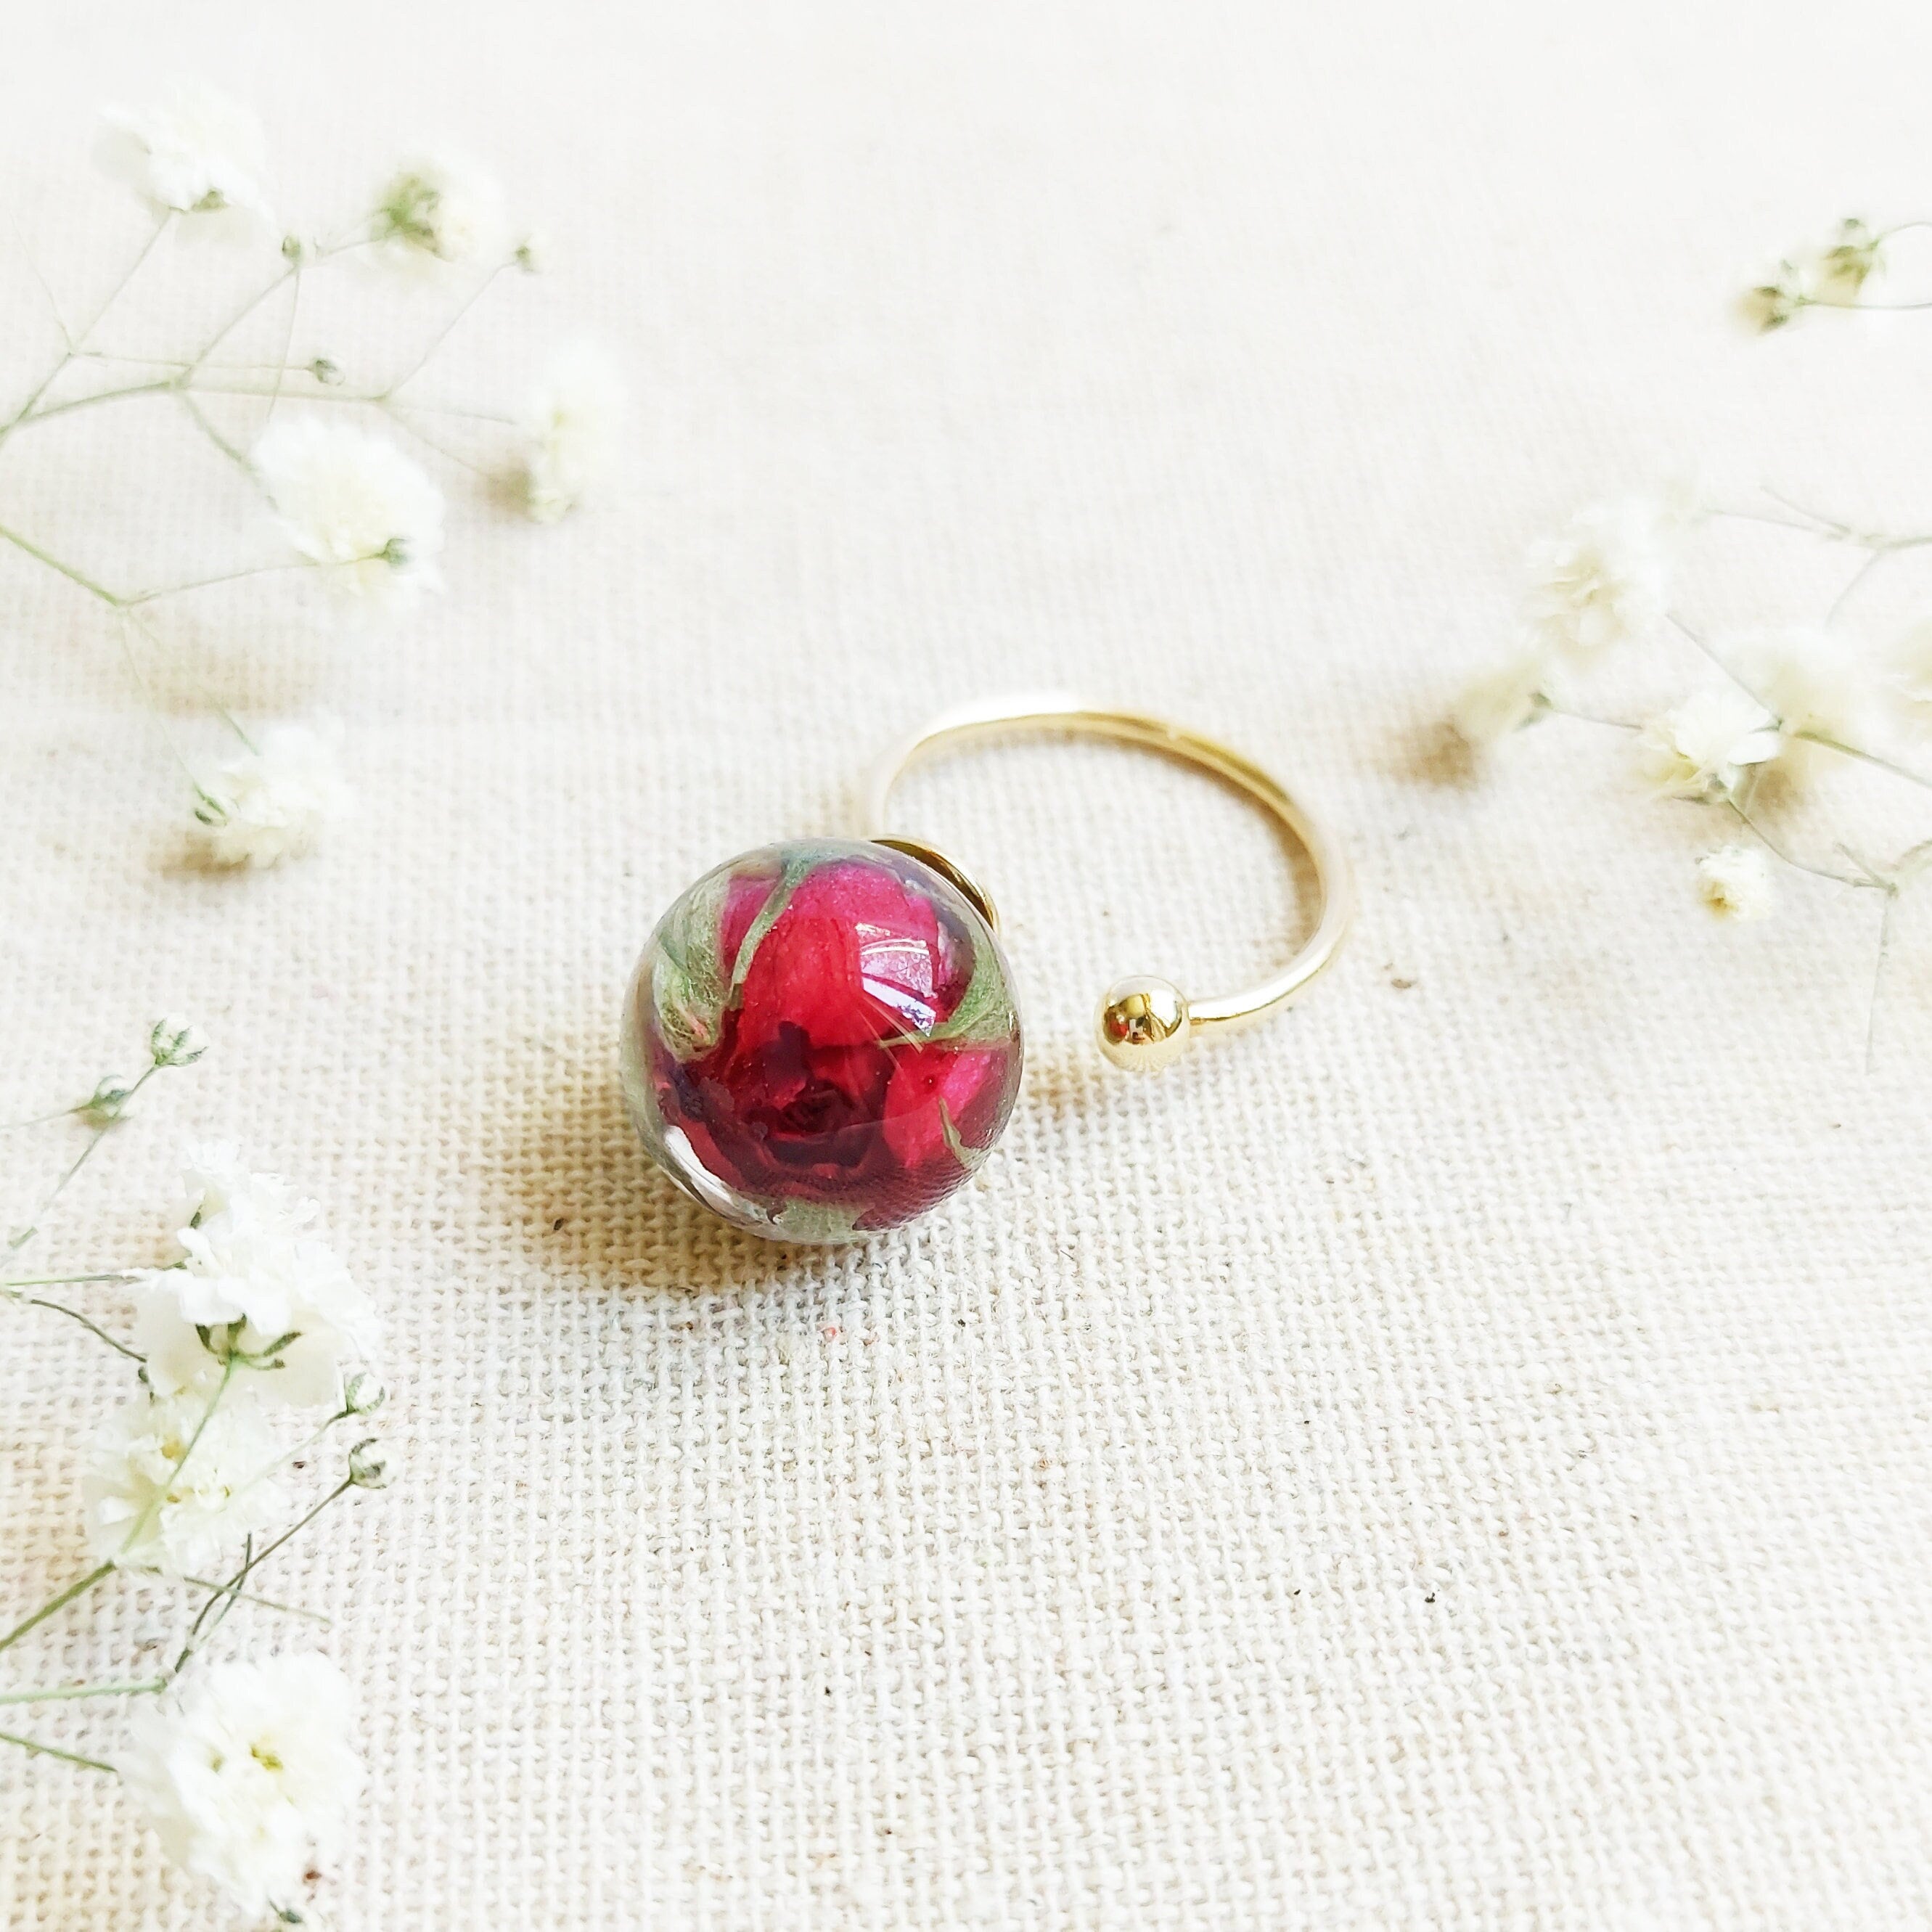 Nature Inspired Rings | Our Favorite Things on Etsy